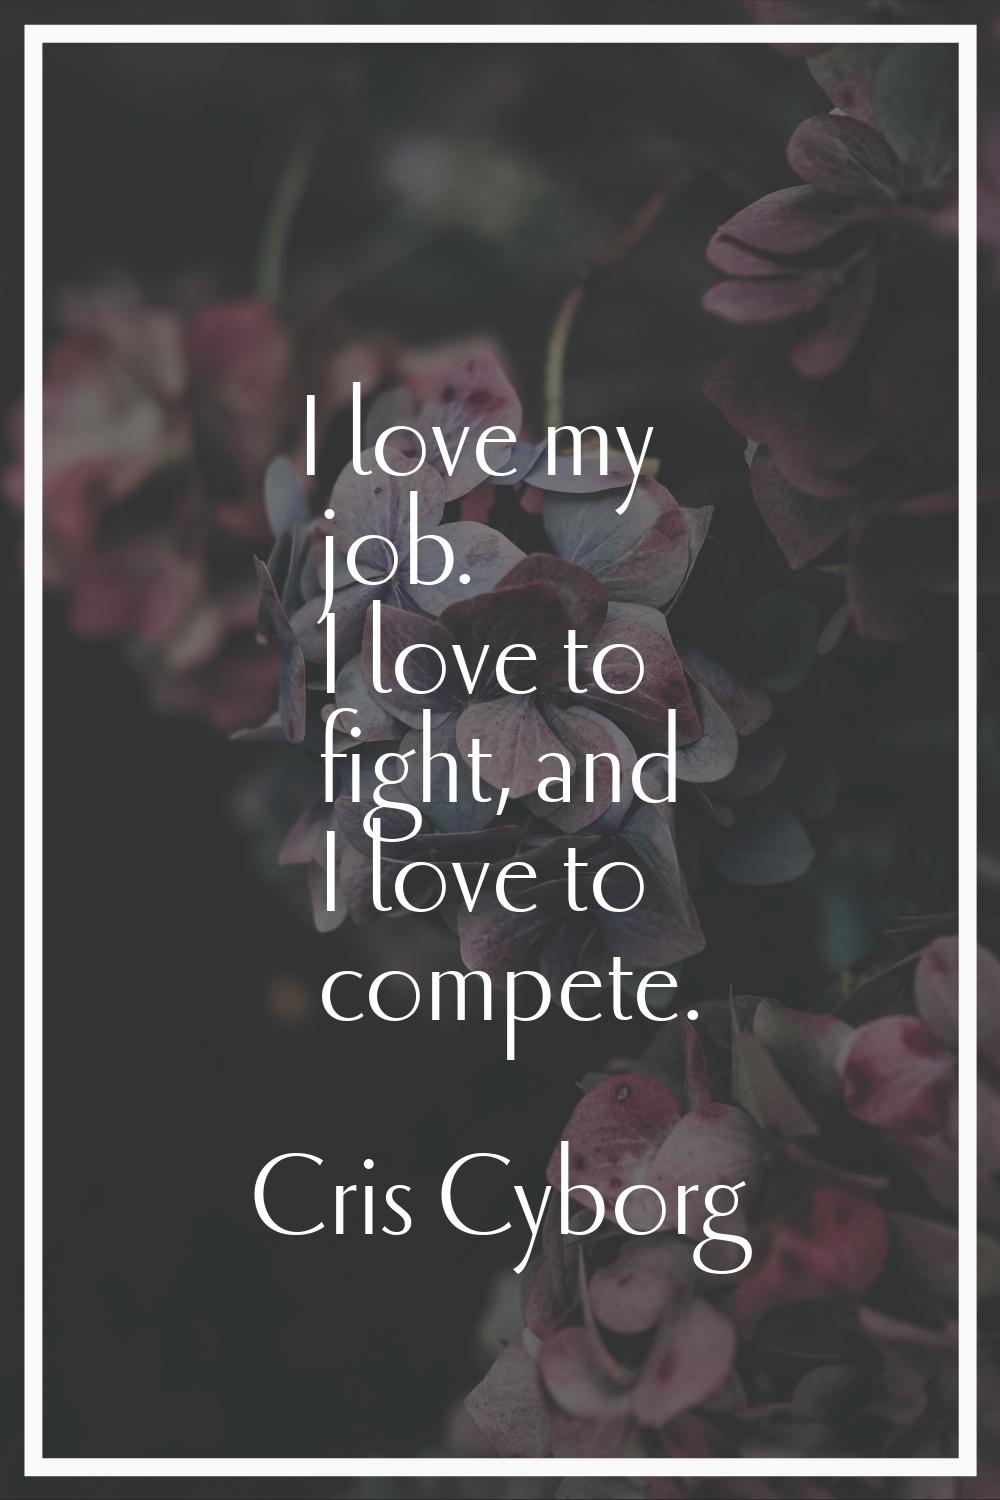 I love my job. I love to fight, and I love to compete.